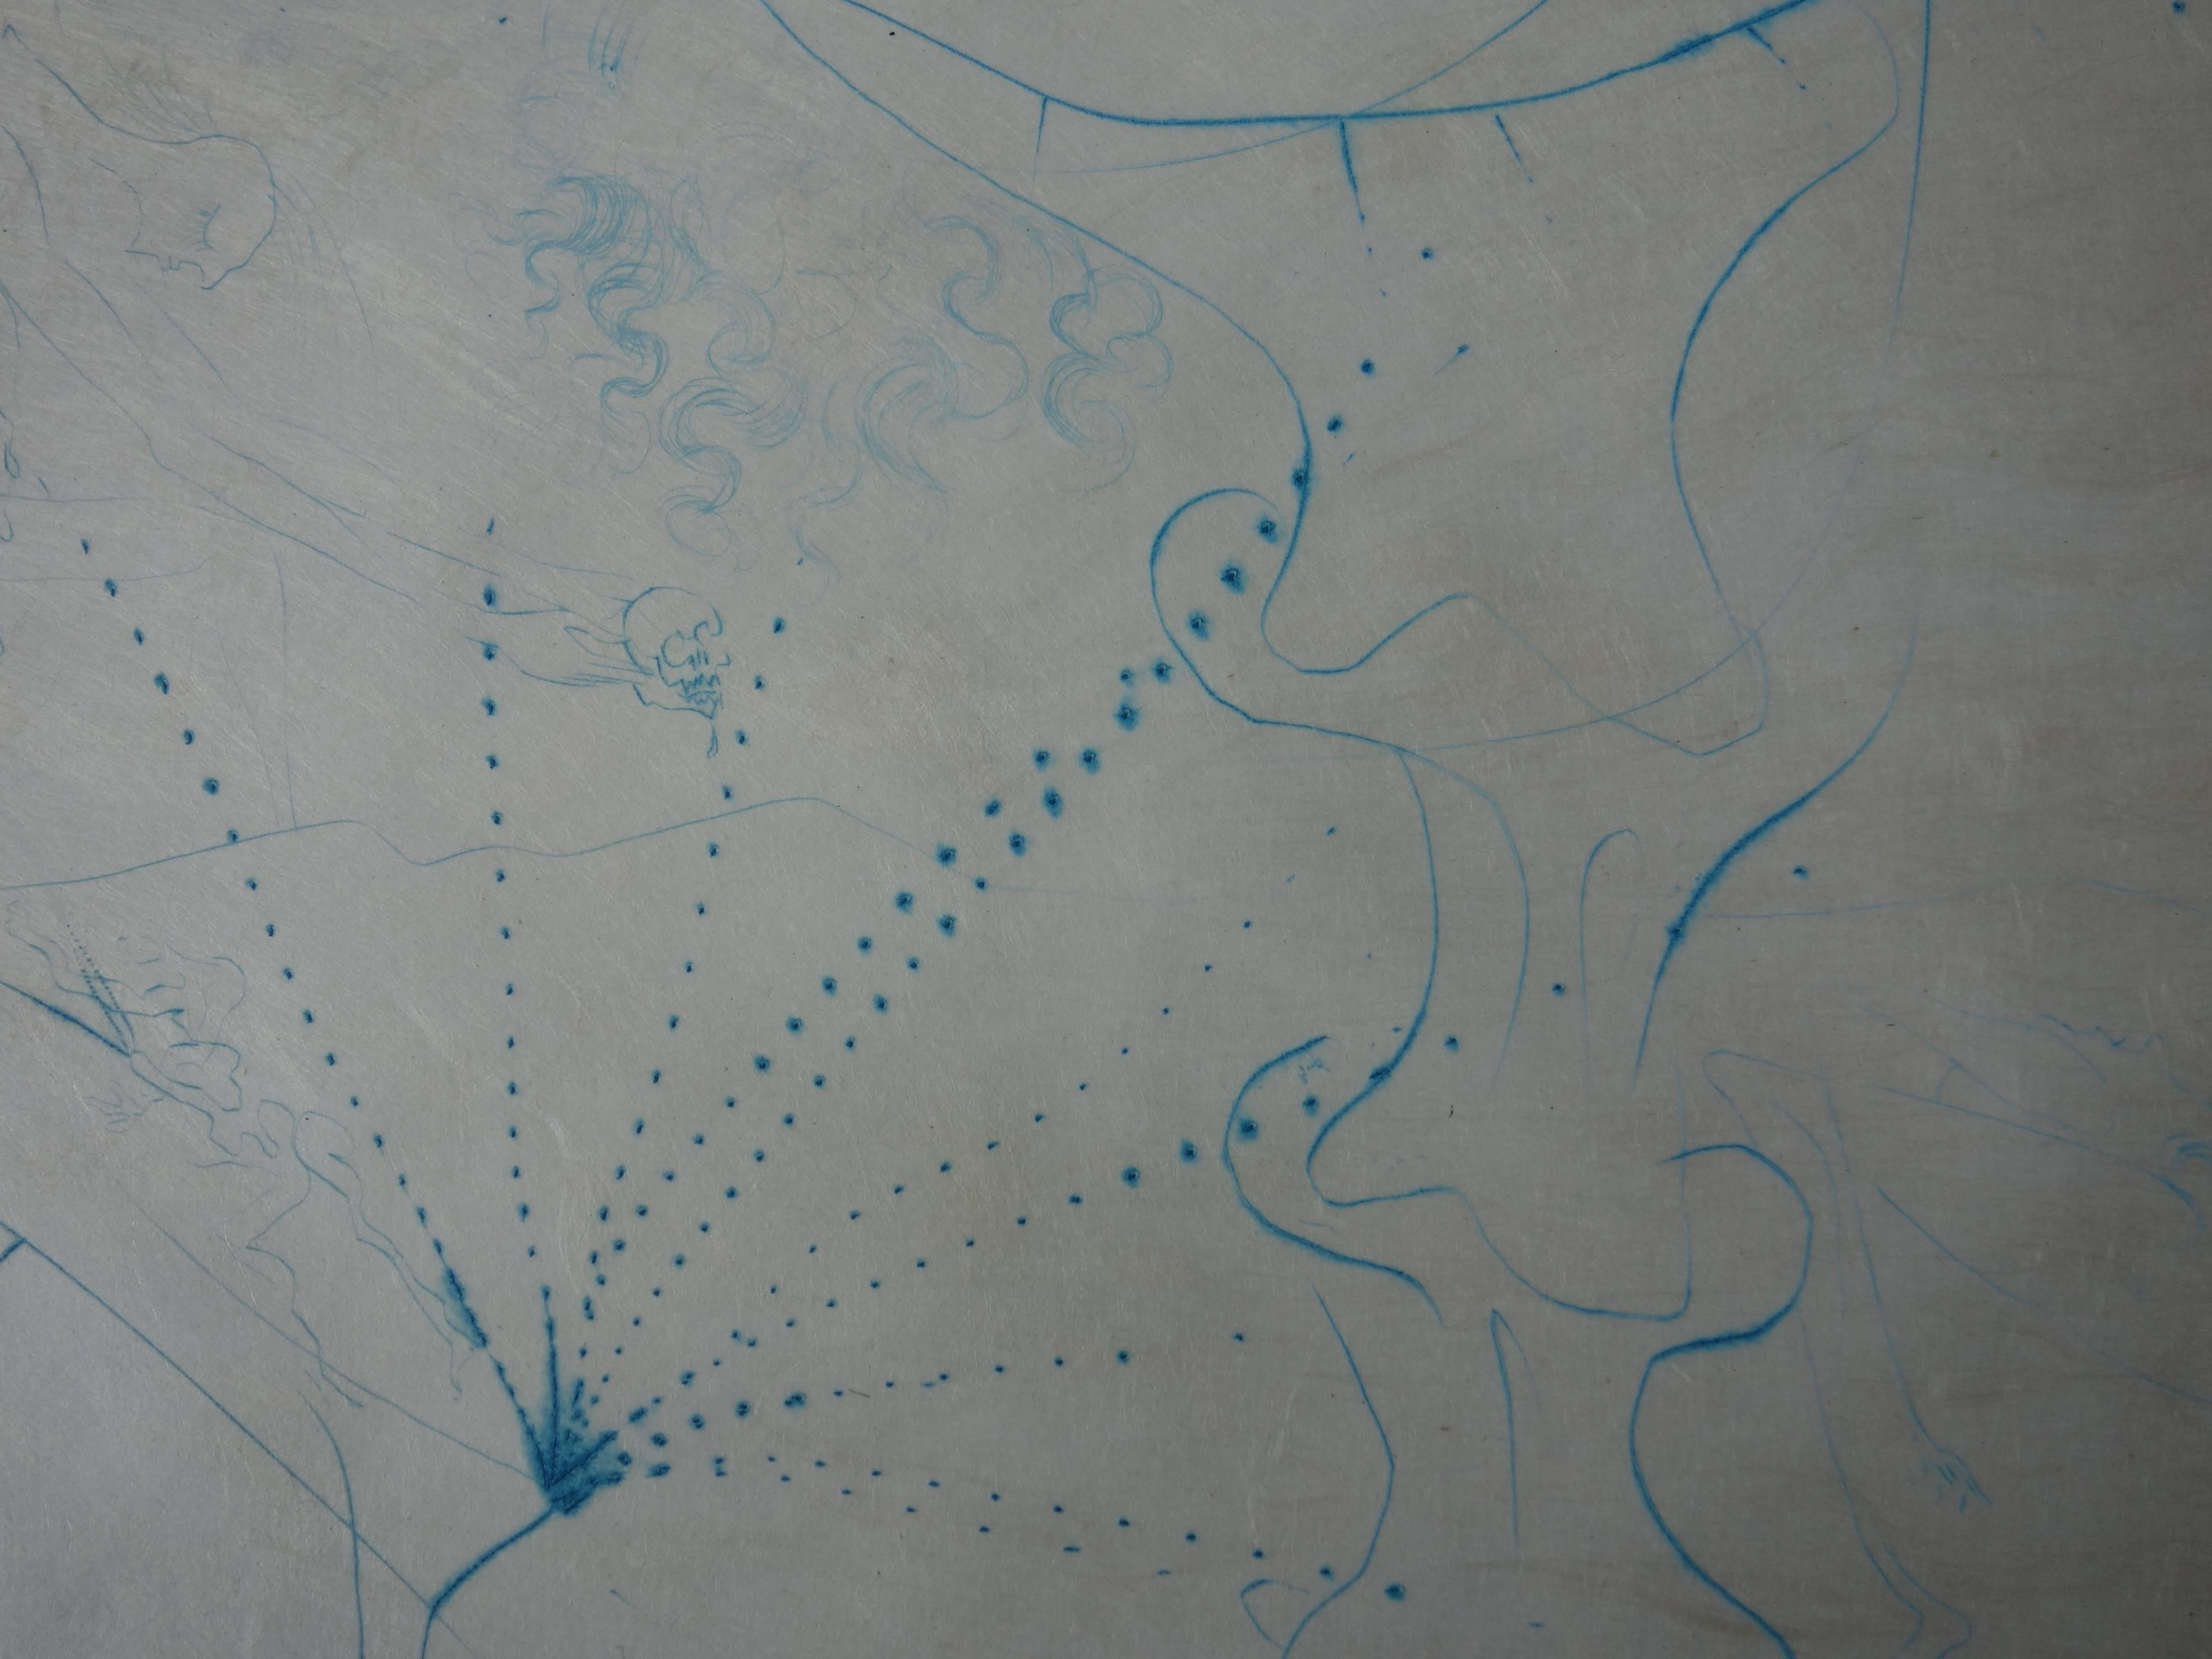 Salvador DALI
Woman Leaf, 1969

Original etching 
Signed bottom right with the blind stamp signature of the artist
Rare proof in blue
On Japan paper 38 x 28 cm (c. 15 x 11 in)

References:
- Catalogue raisonné Field #68-6F
- Catalogue raisonné